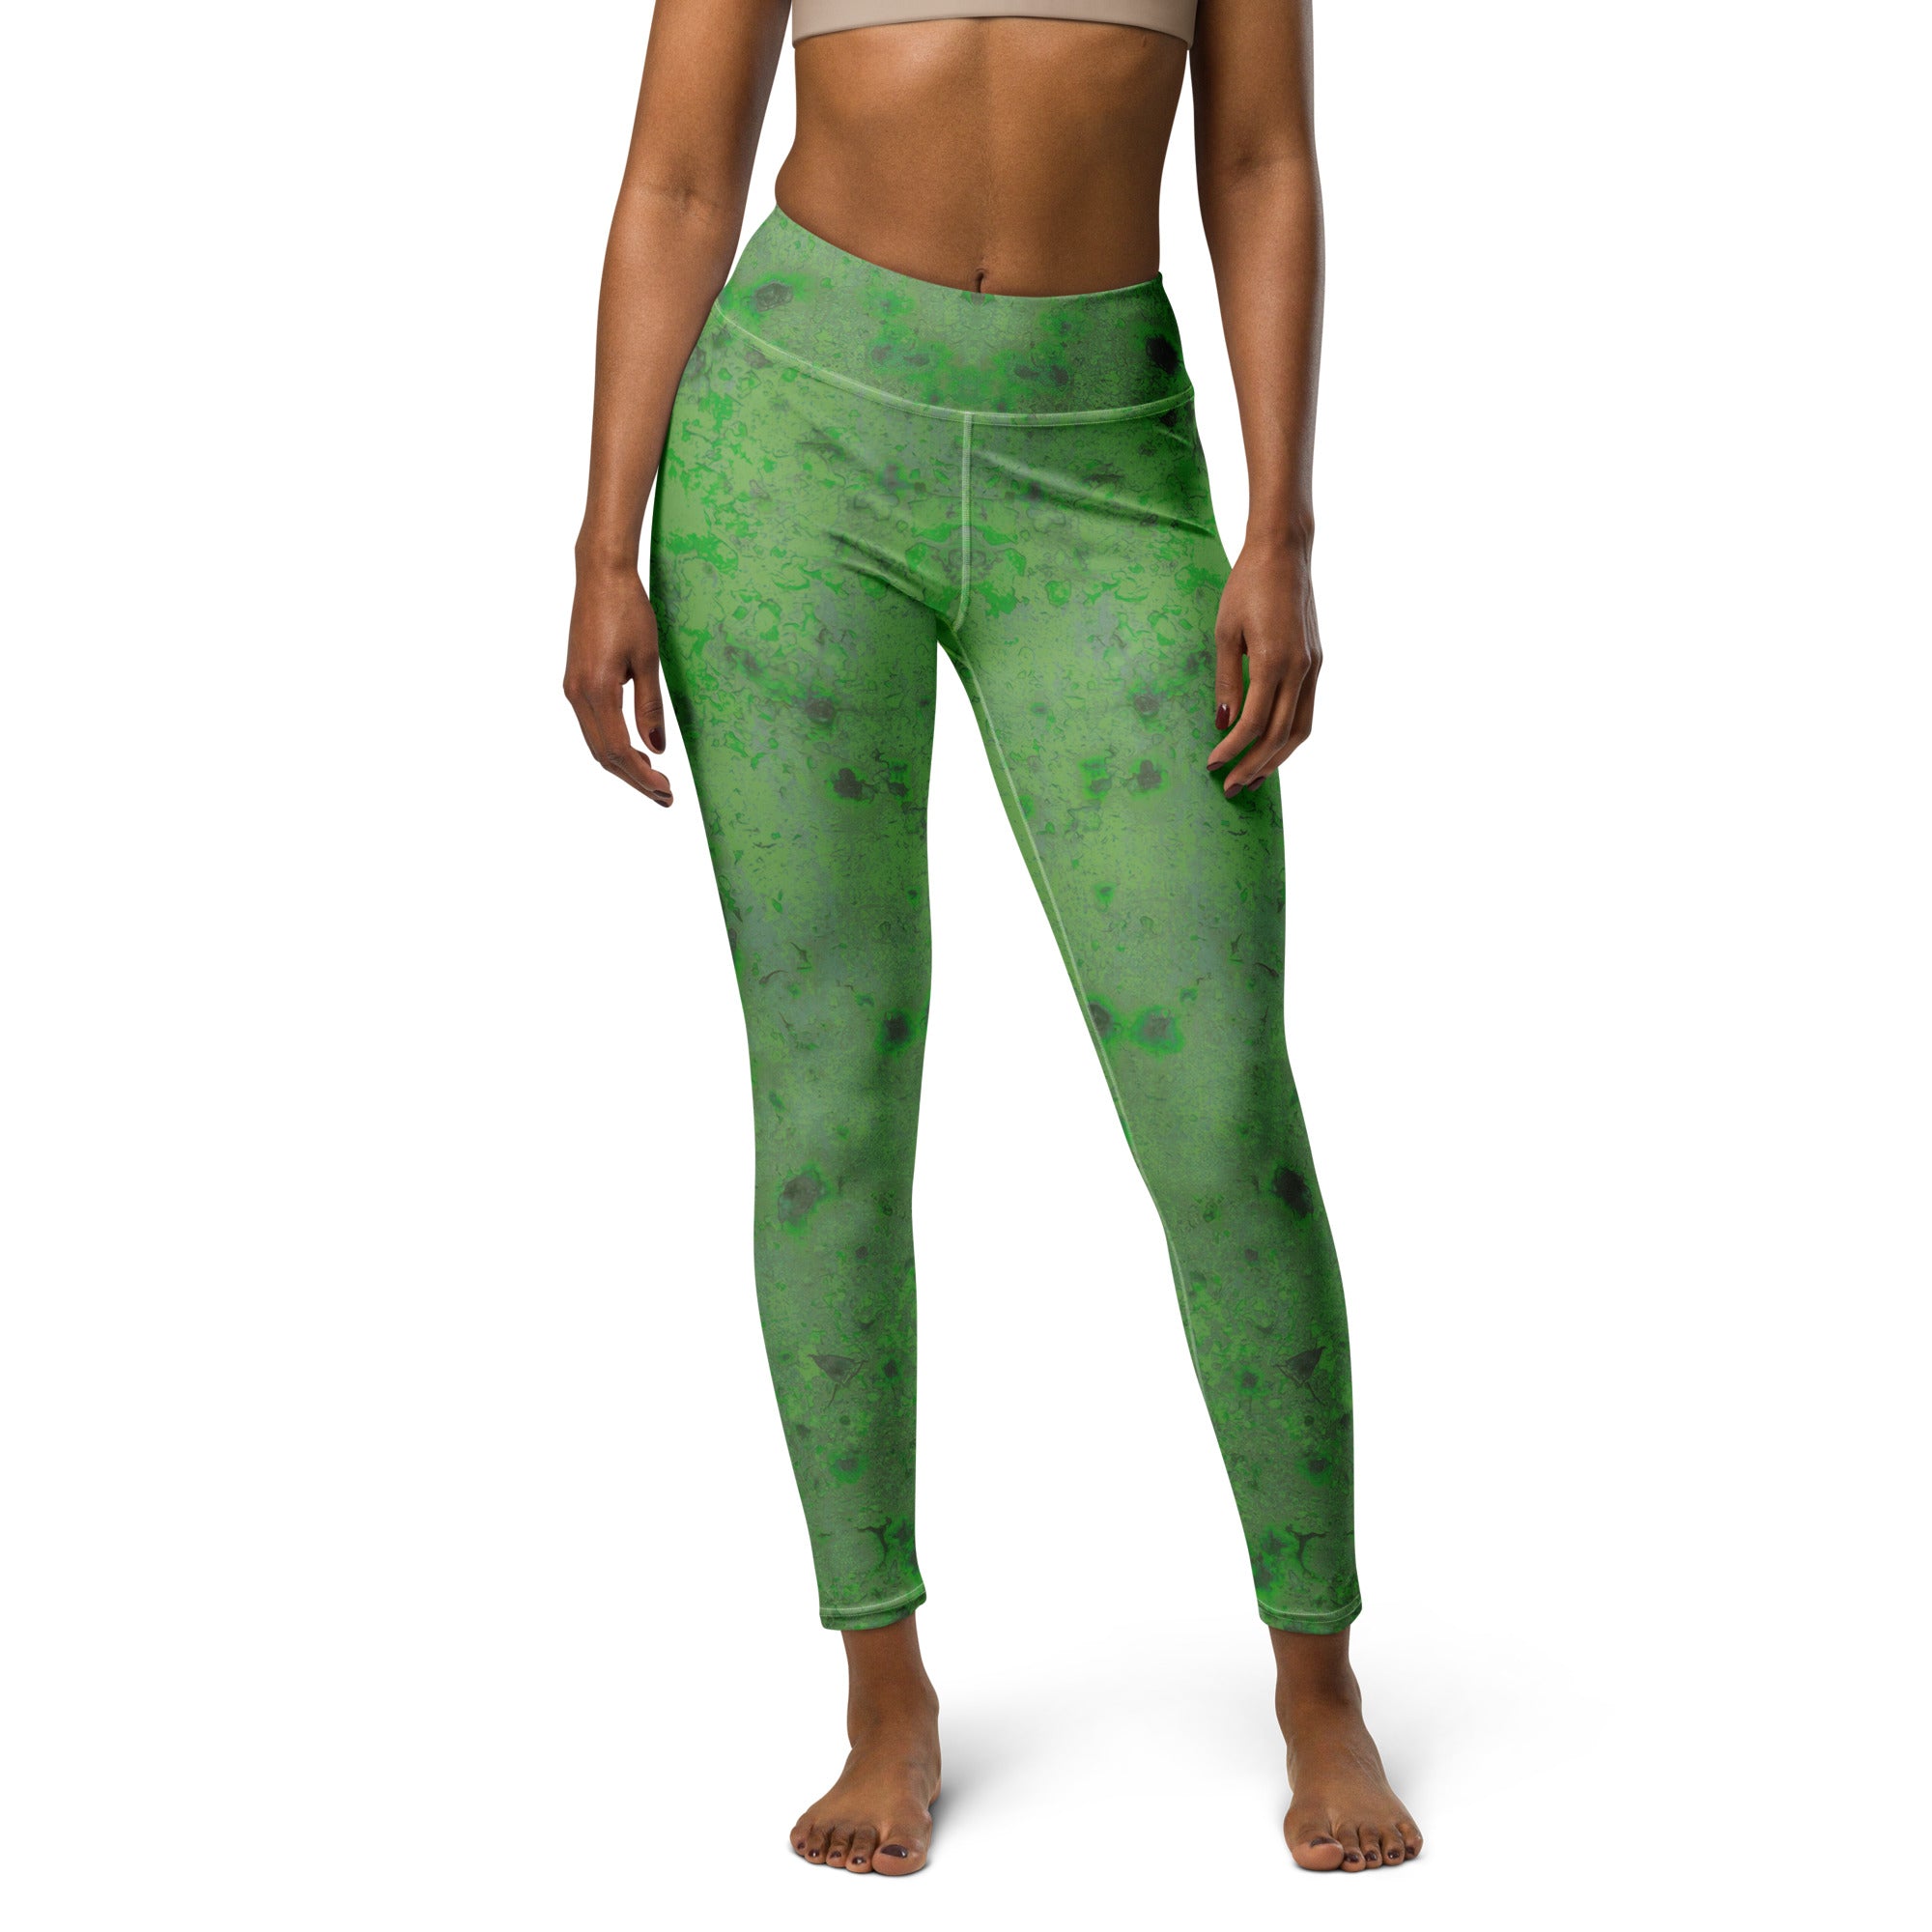 Velvety Bloom Yoga Leggings with Floral Design for Yoga Enthusiasts